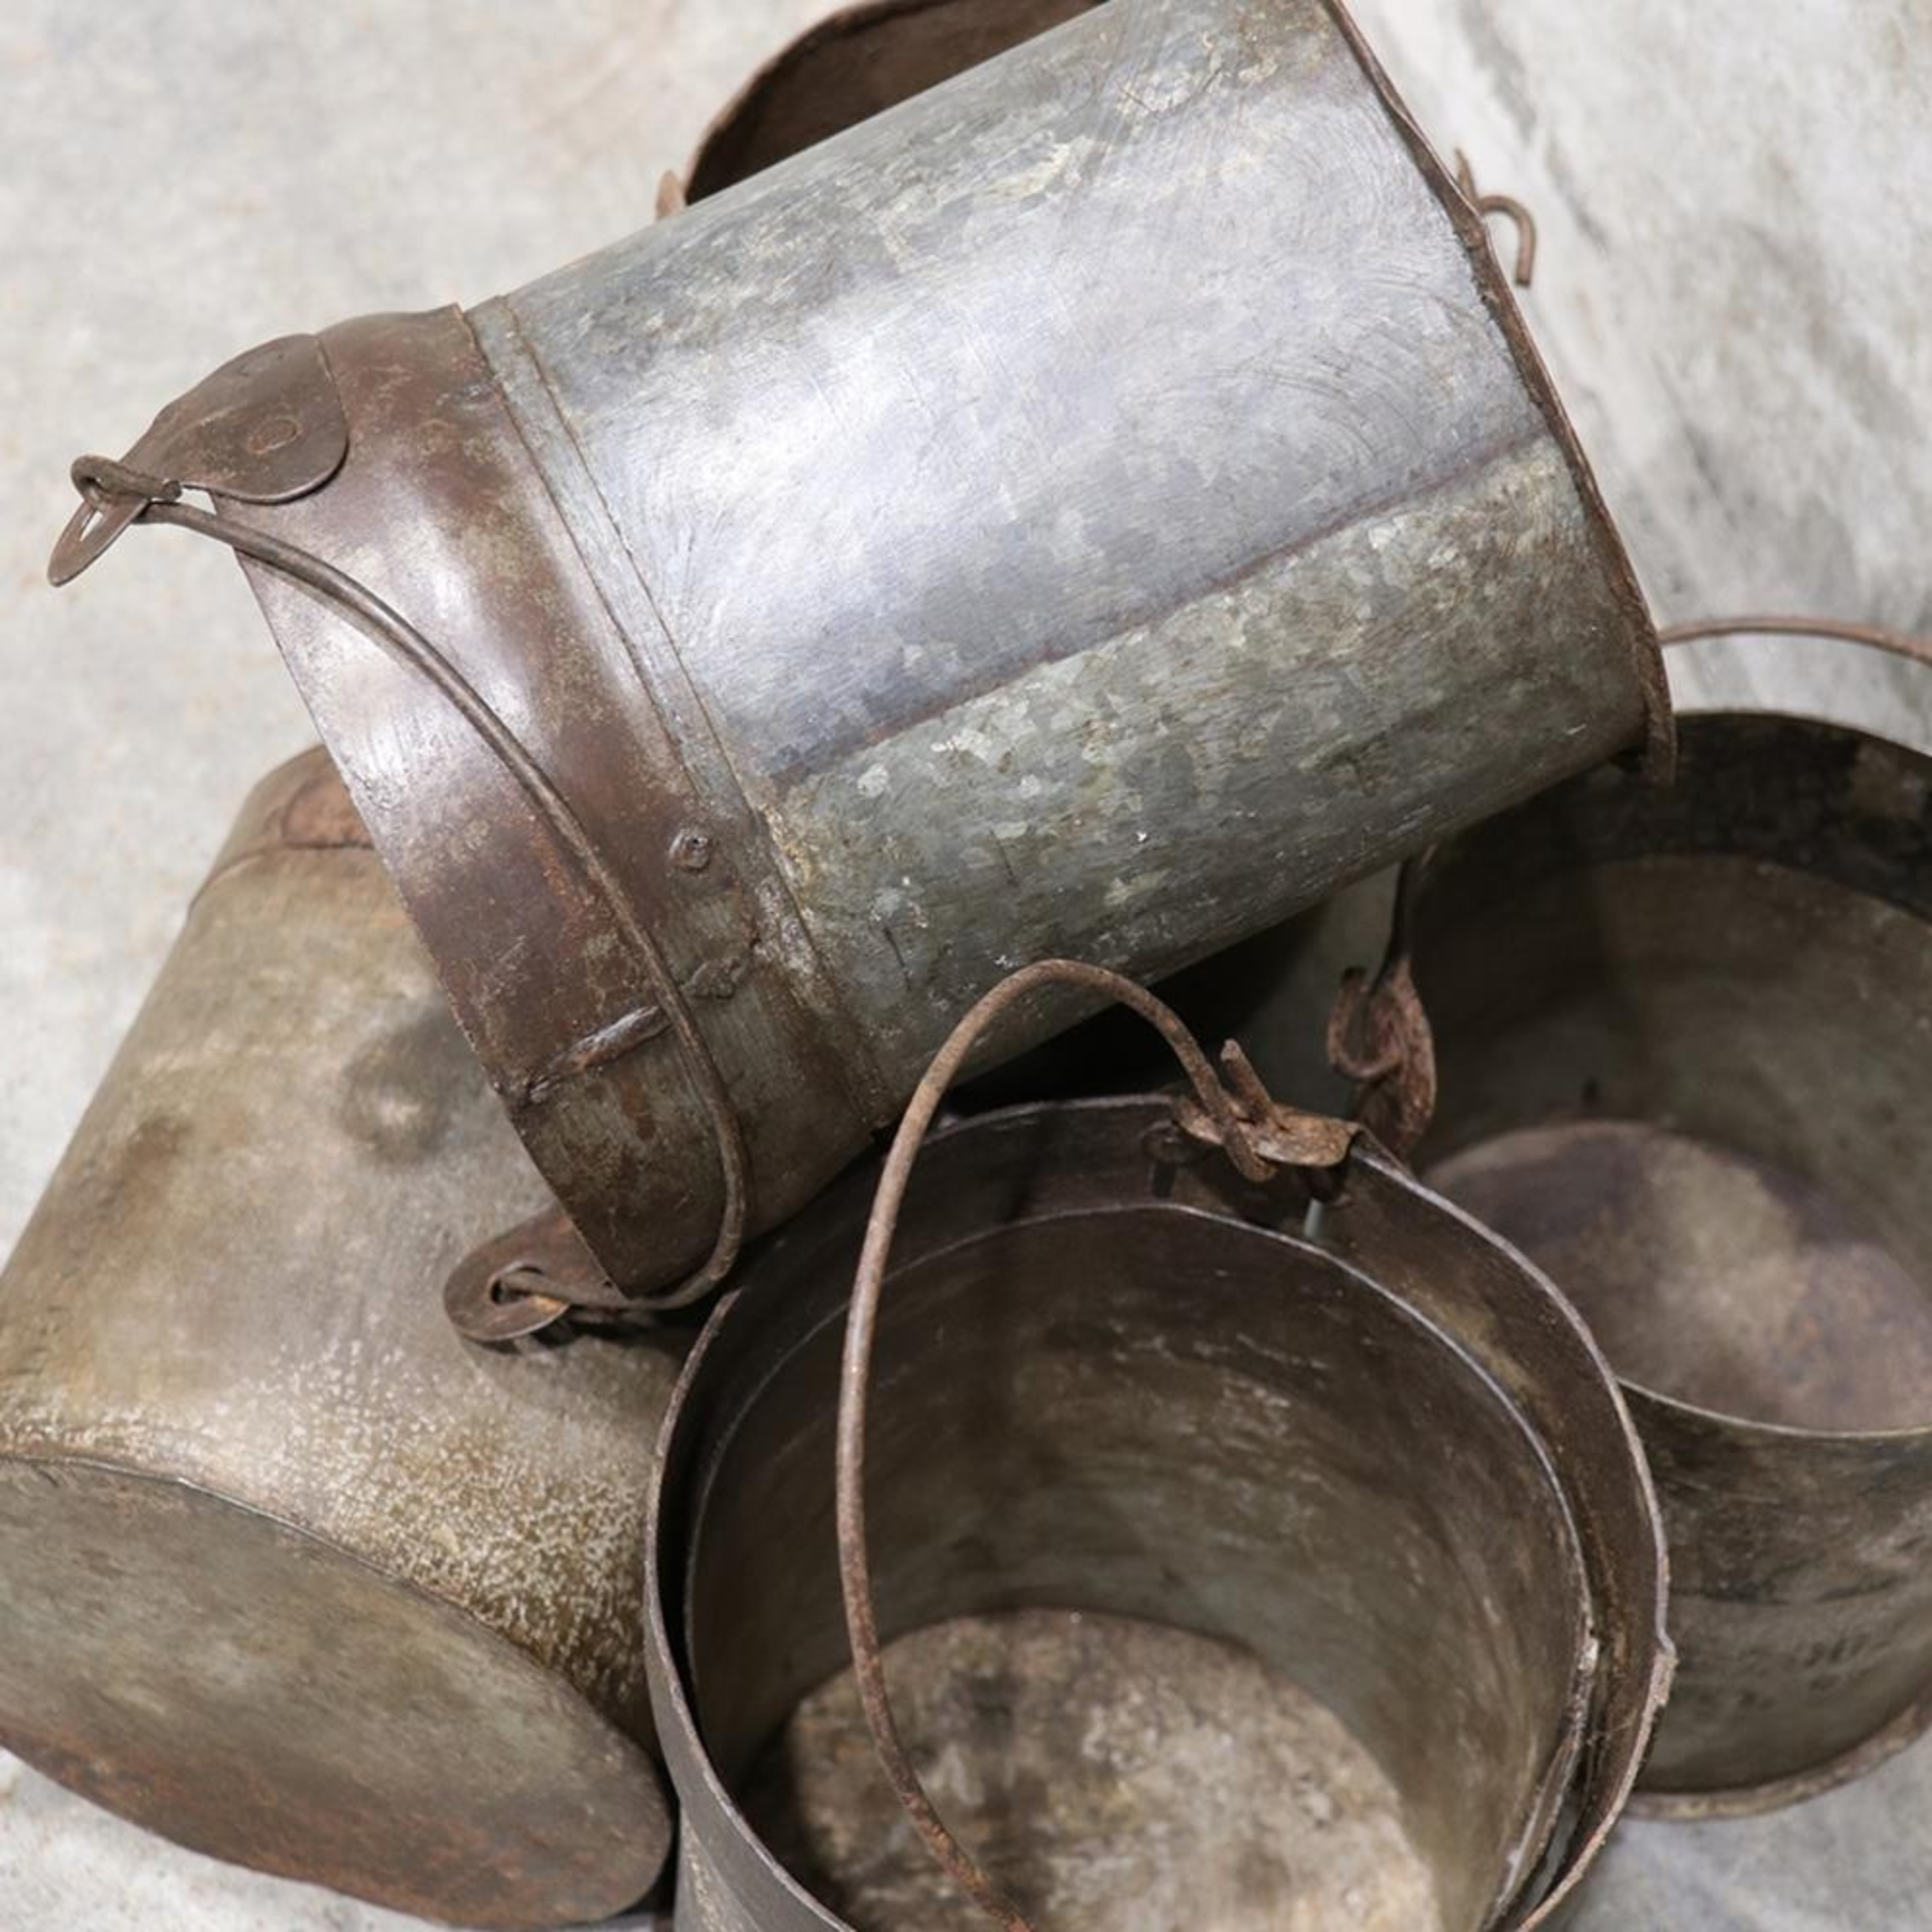 ORIGINAL PAIL | MADE FROM BOMB CASINGS